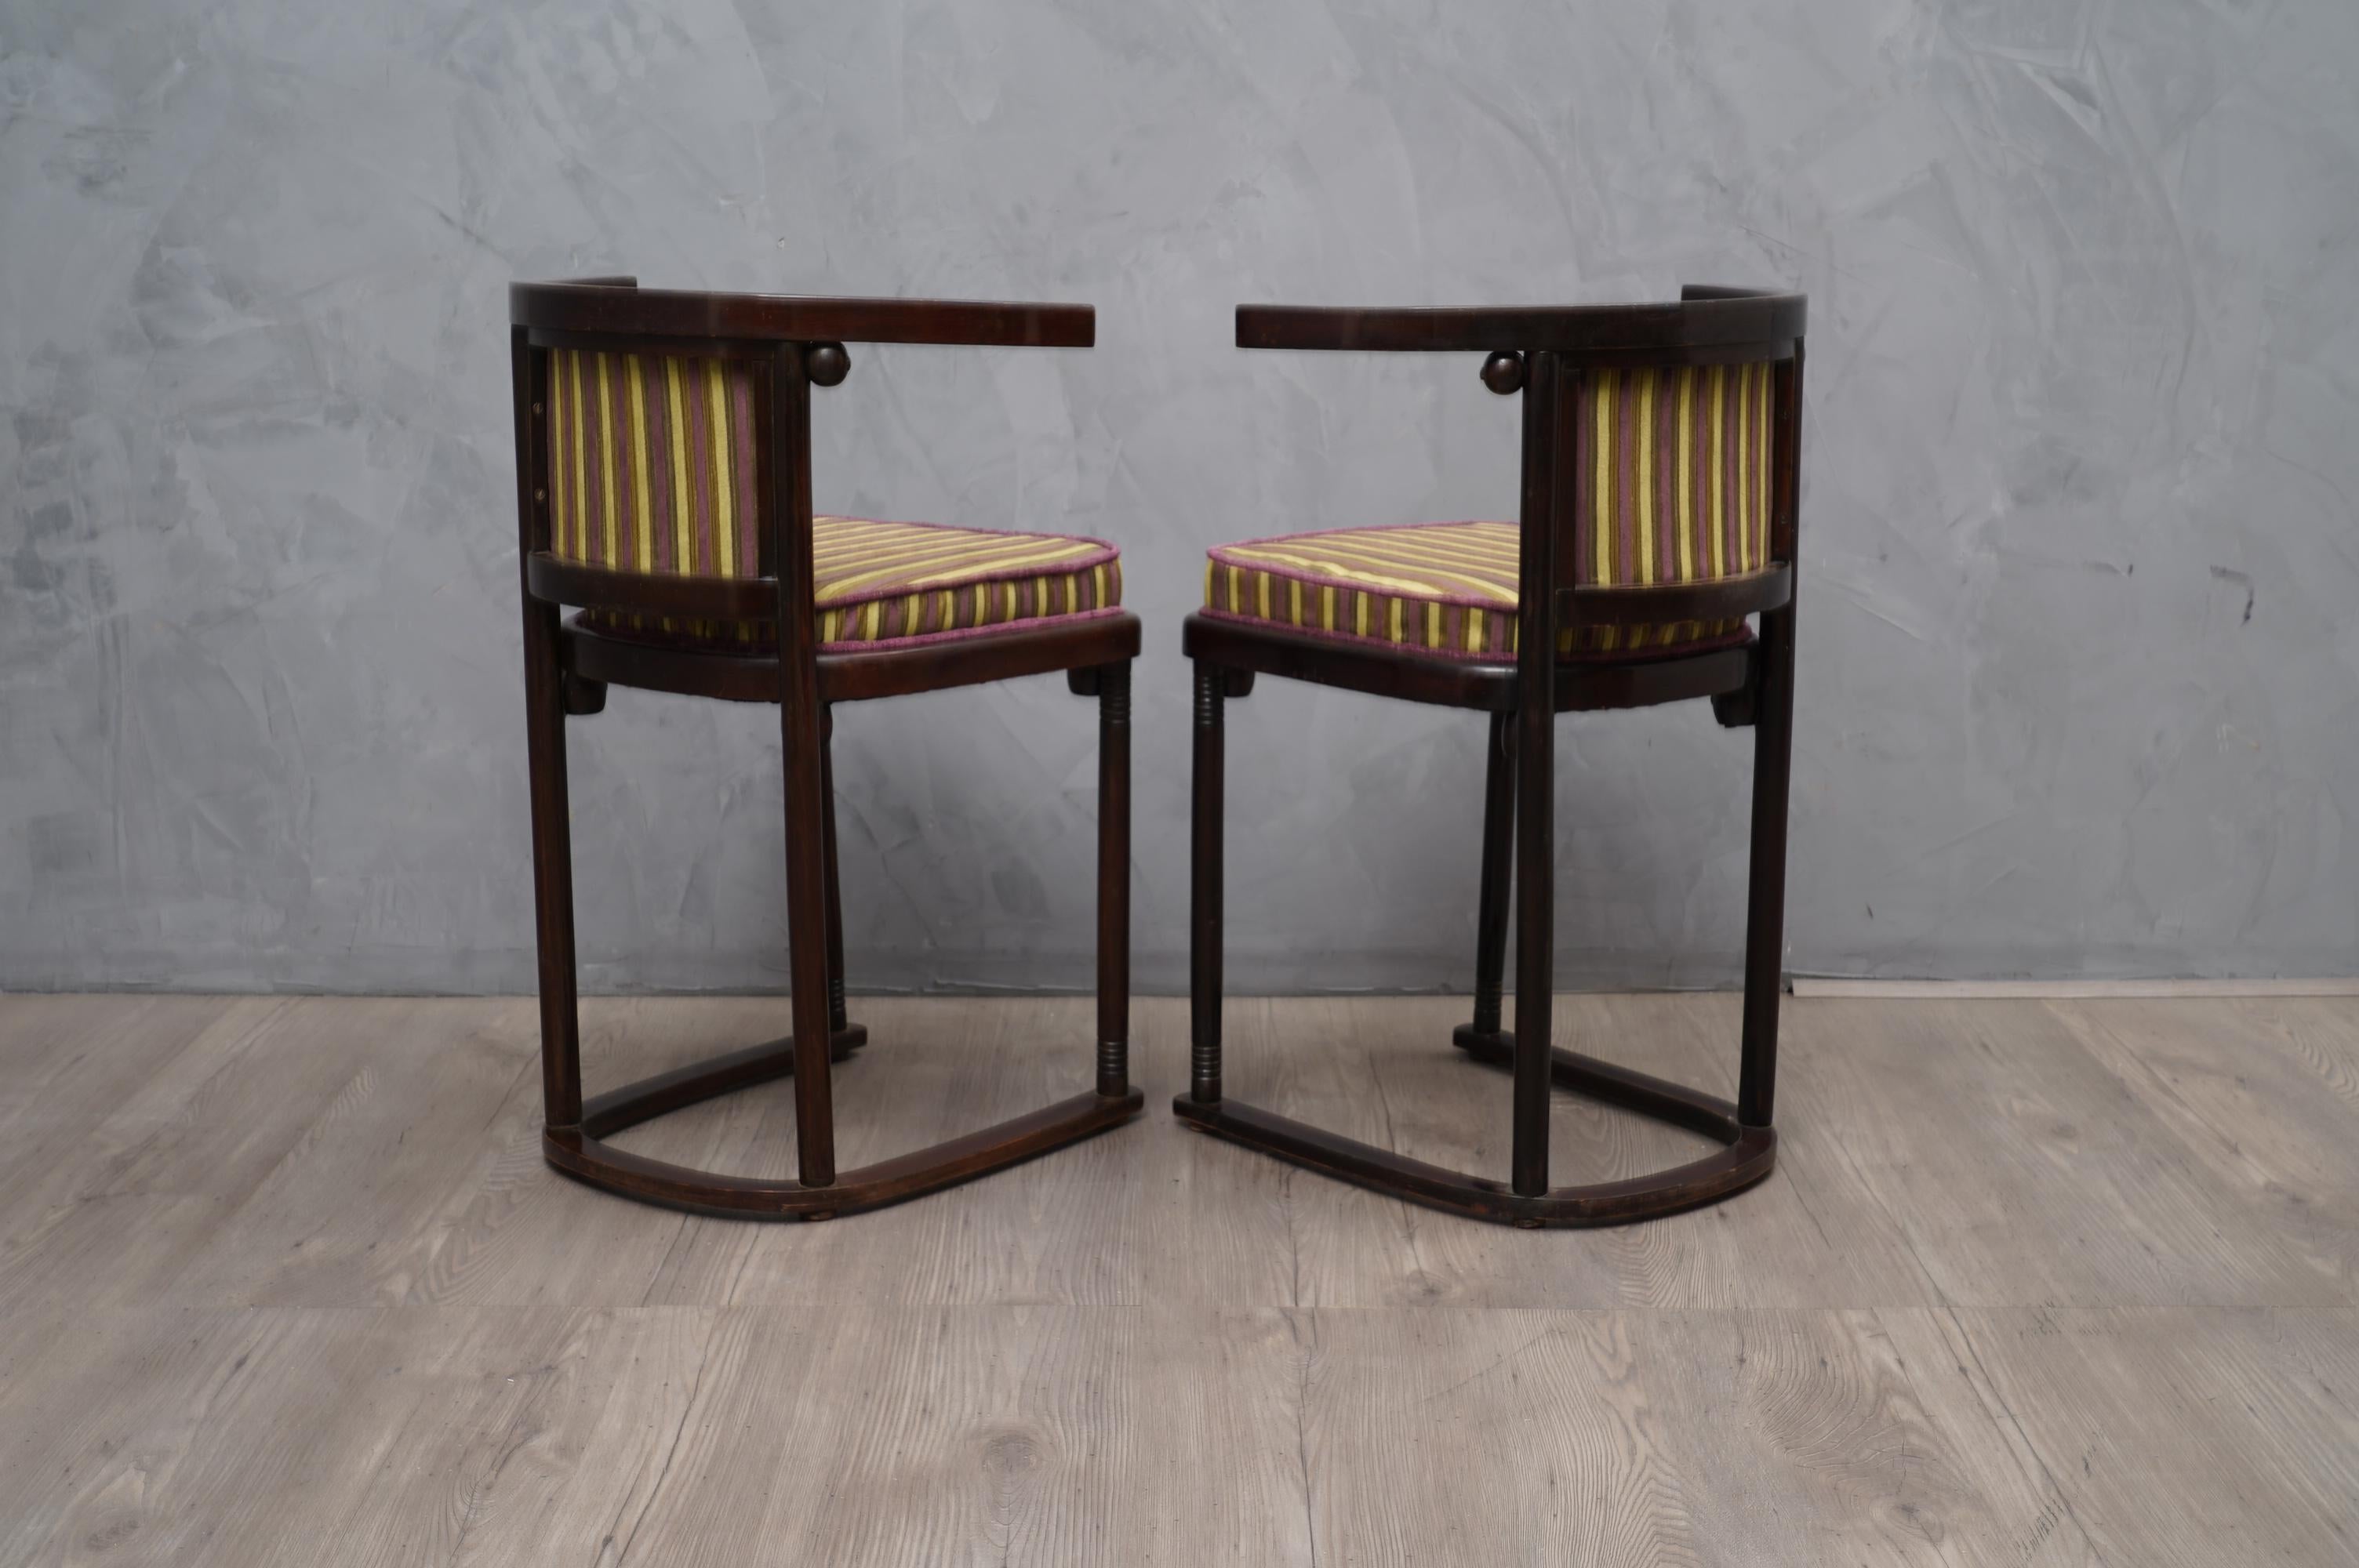 Pair of Art Nouveau Beech Wood and Striped Velvet Austrian Chairs, 1910 For Sale 2